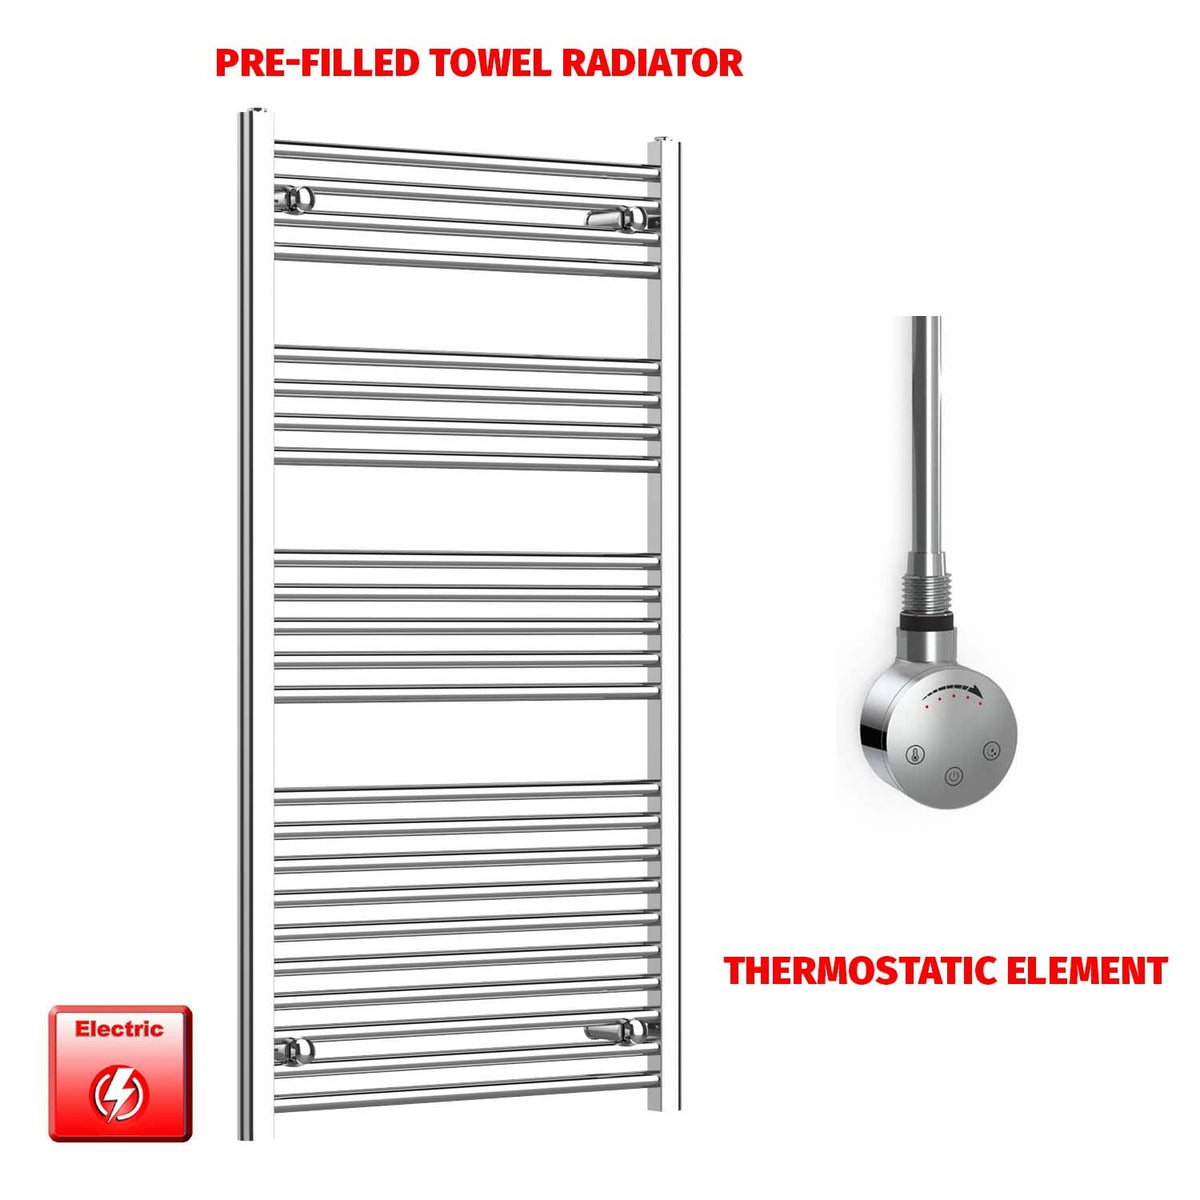 1200mm High 650mm Wide Pre-Filled Electric Heated Towel Radiator Chrome HTR